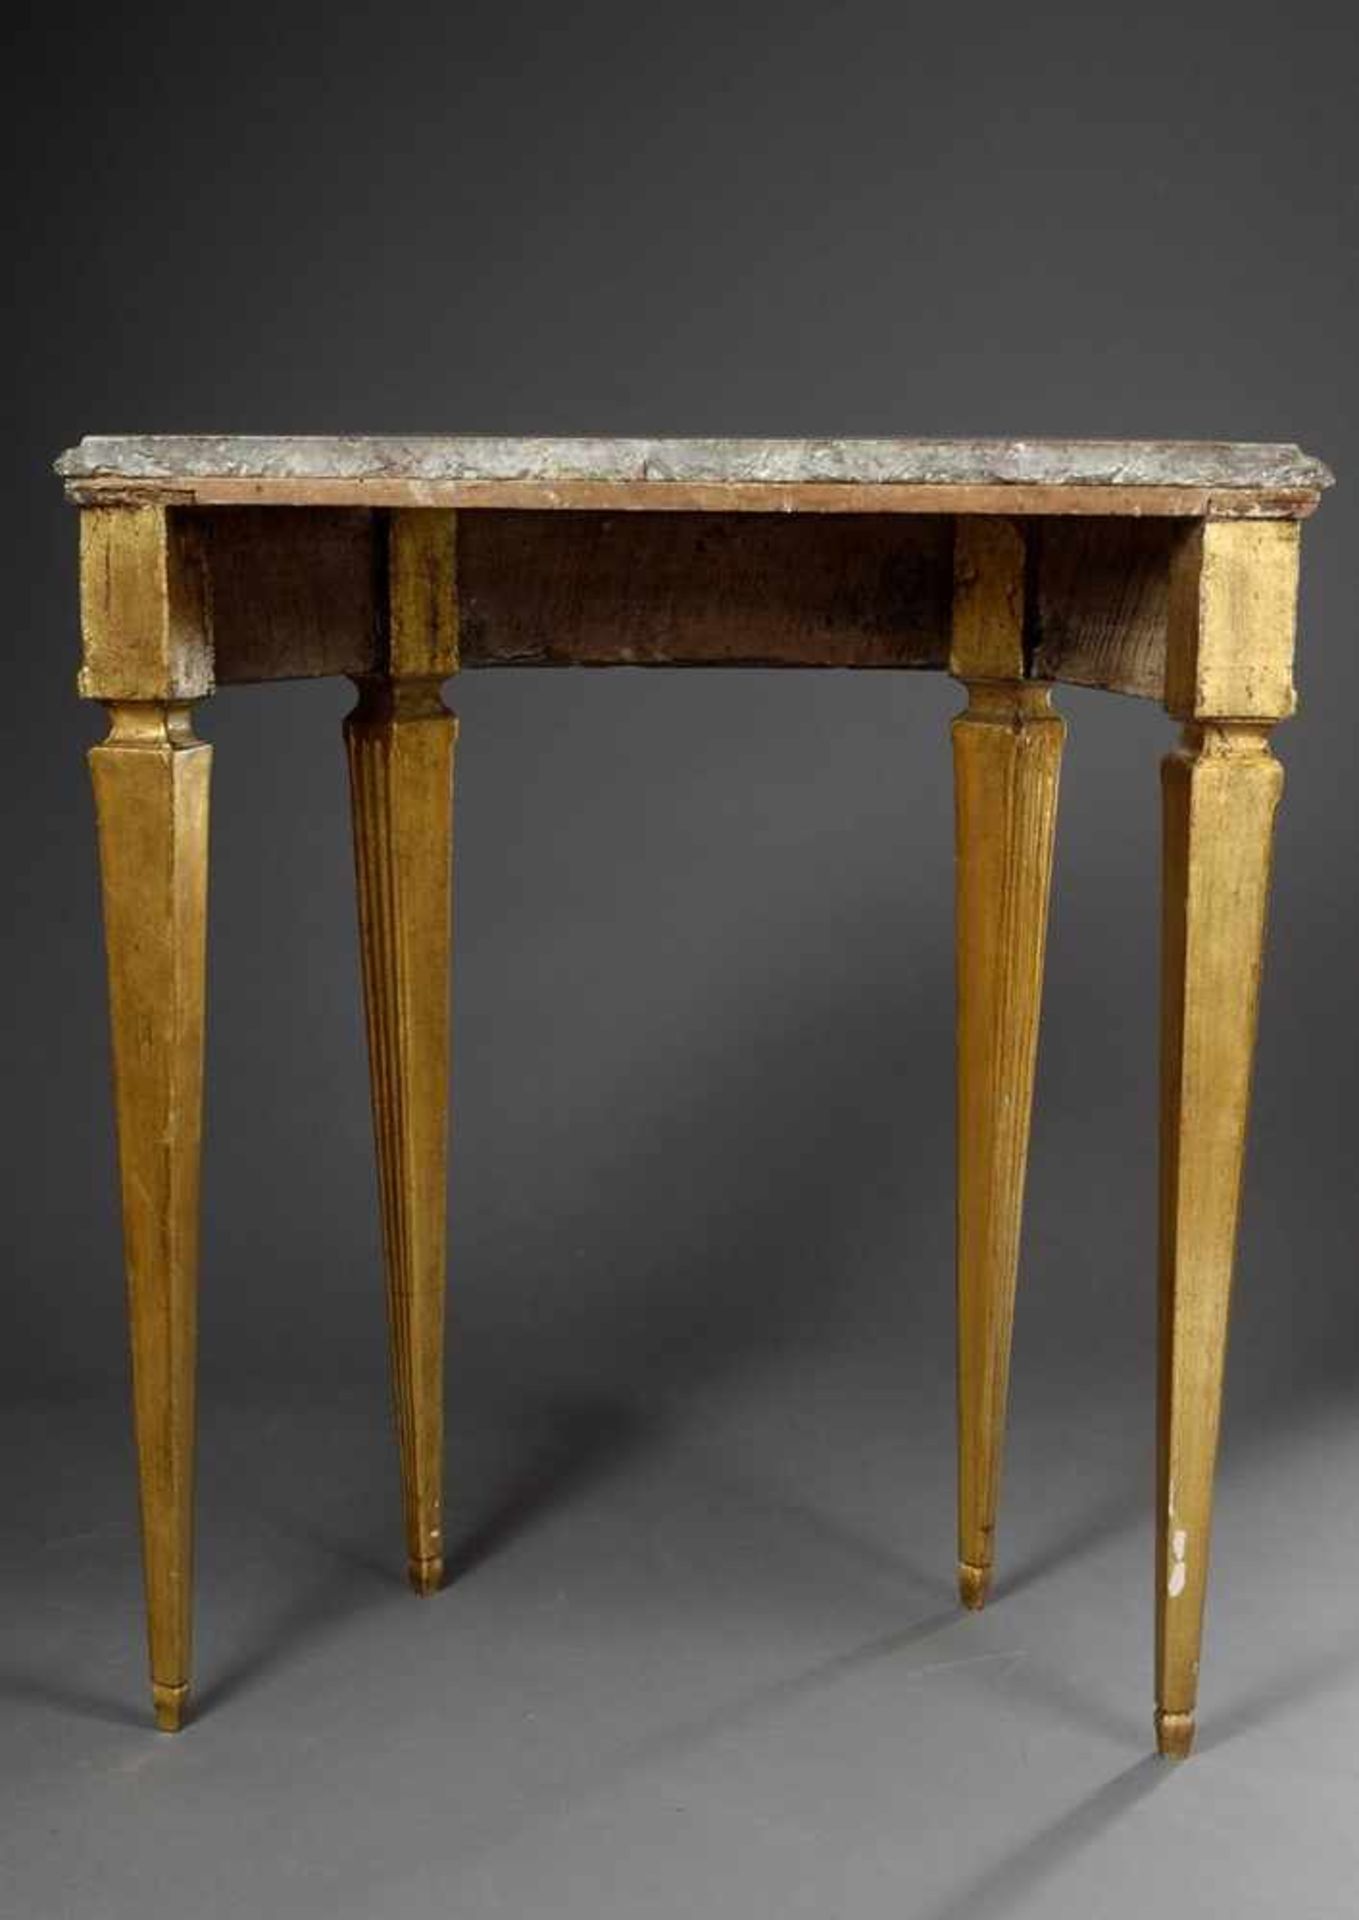 Courtly Louis XVI console on pointed legs with floral and ornamental relief carving "Birds" in the - Image 3 of 6